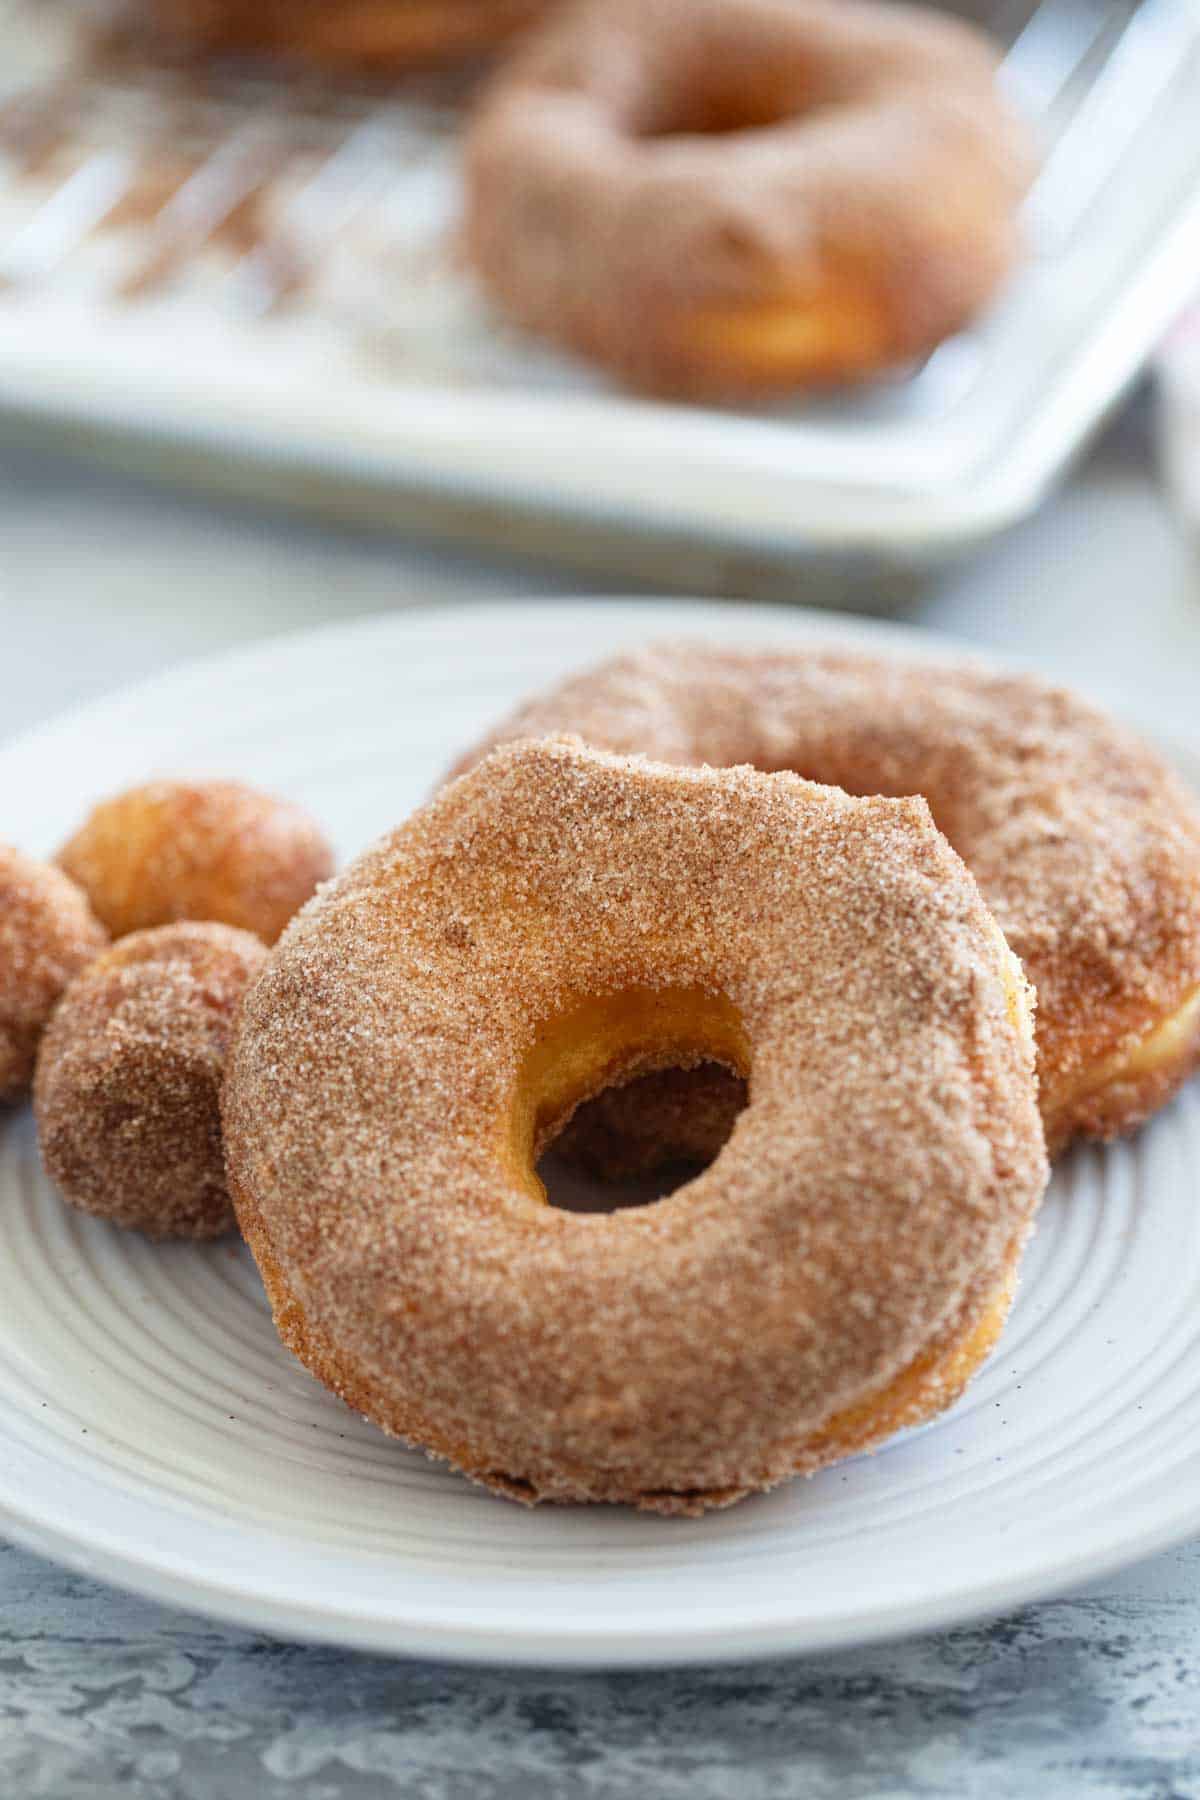 Biscuit donut and donut holes covered in cinnamon sugar.